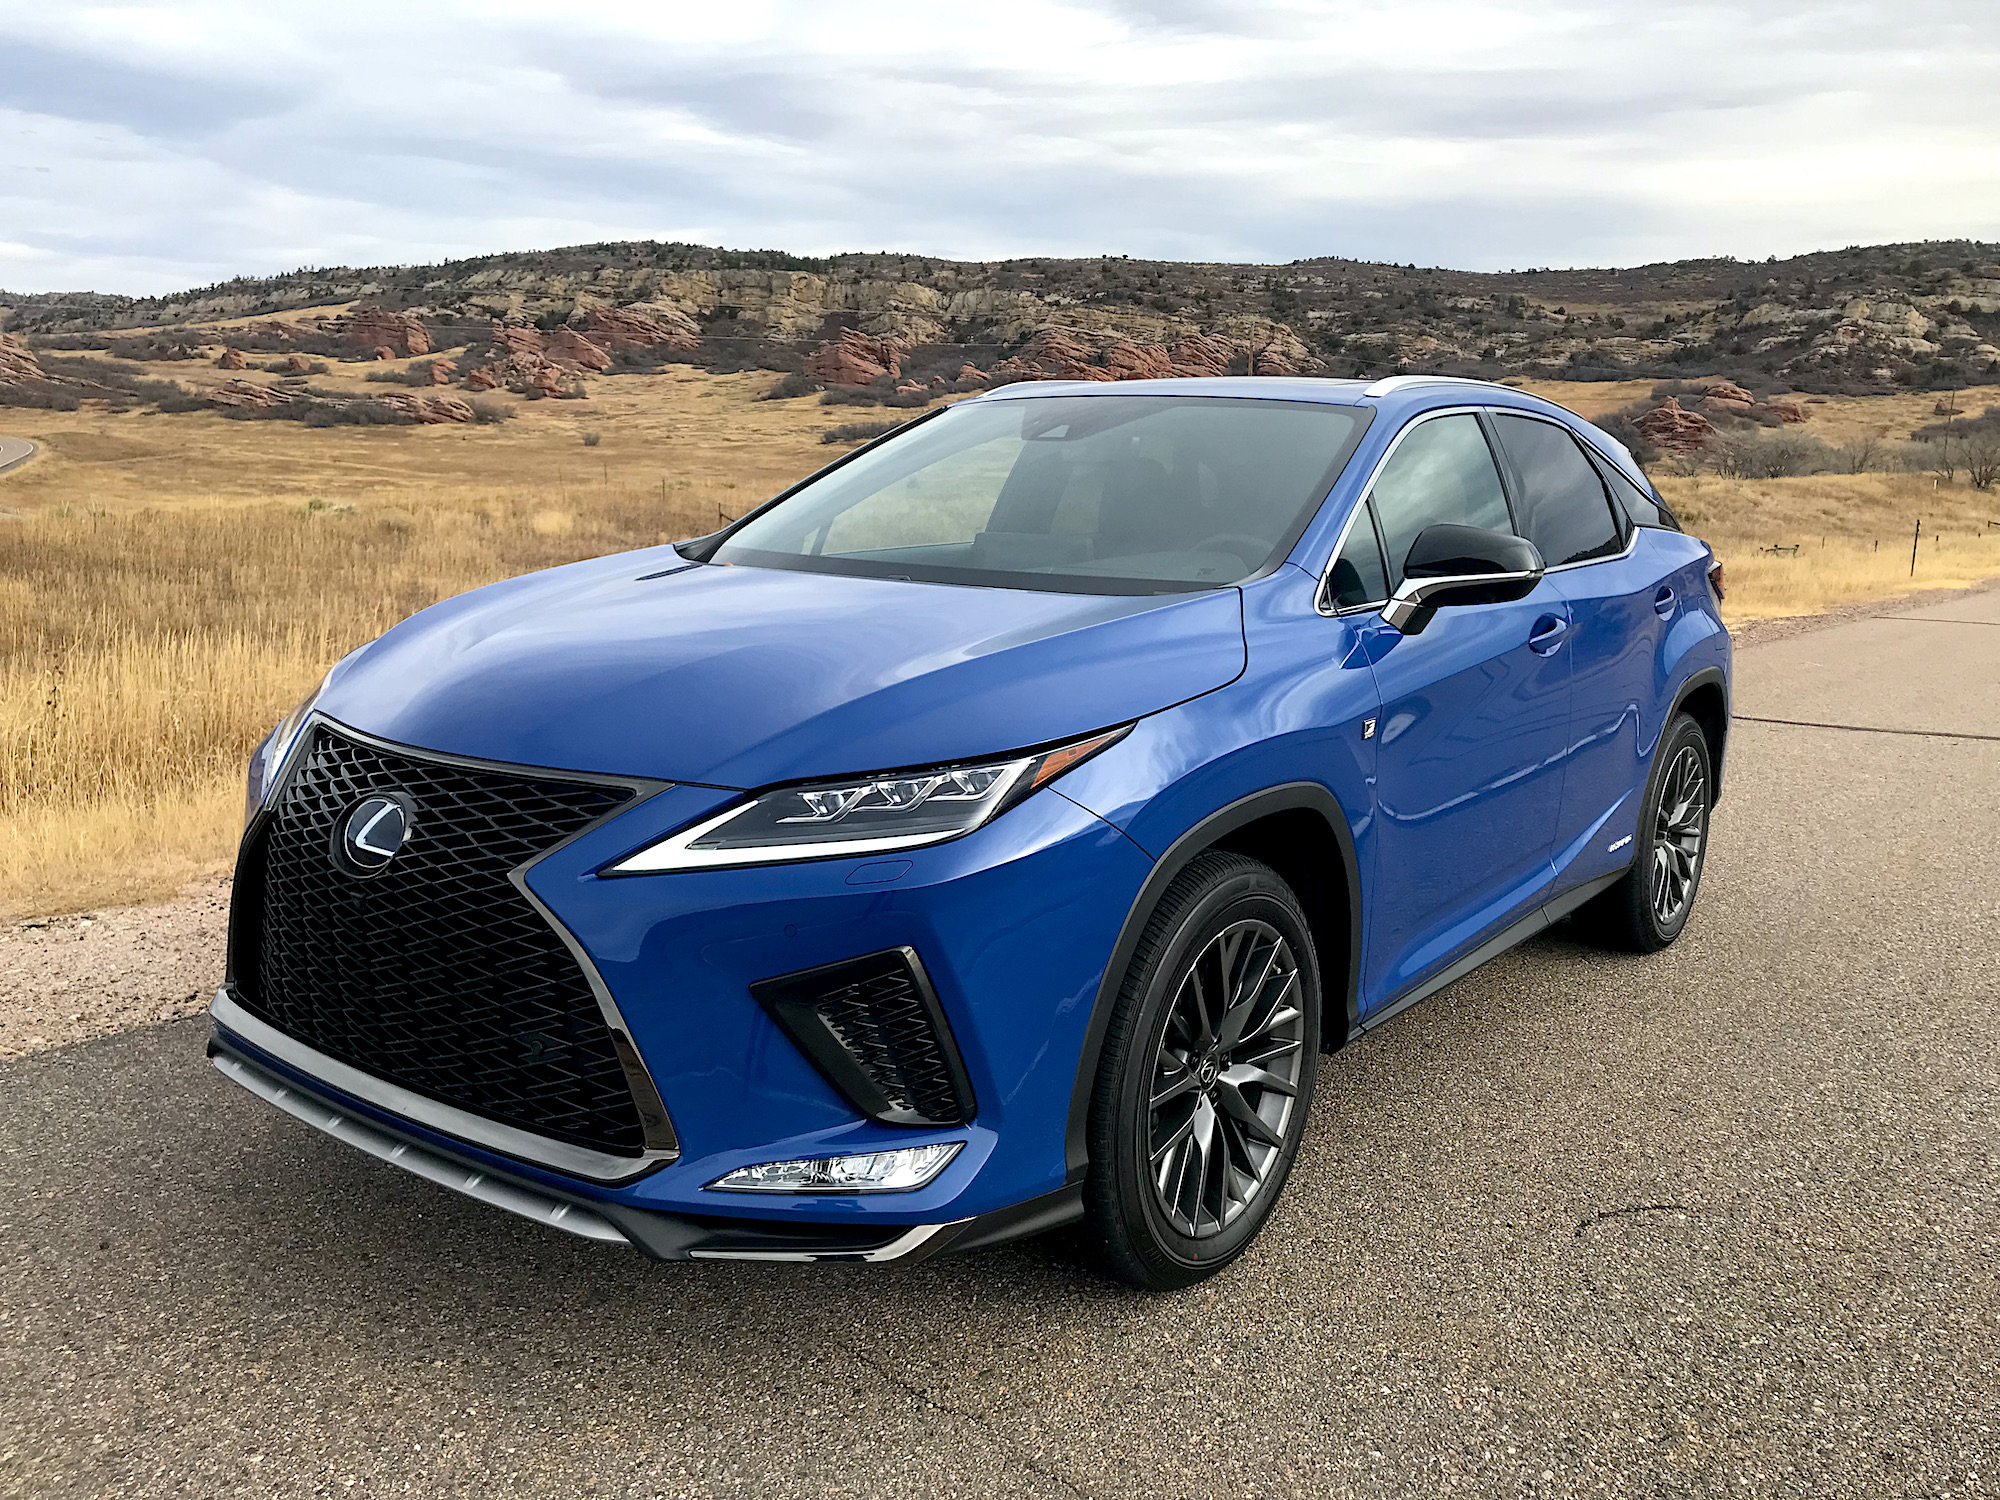 2022 Lexus RX shown in blue on a dirt road